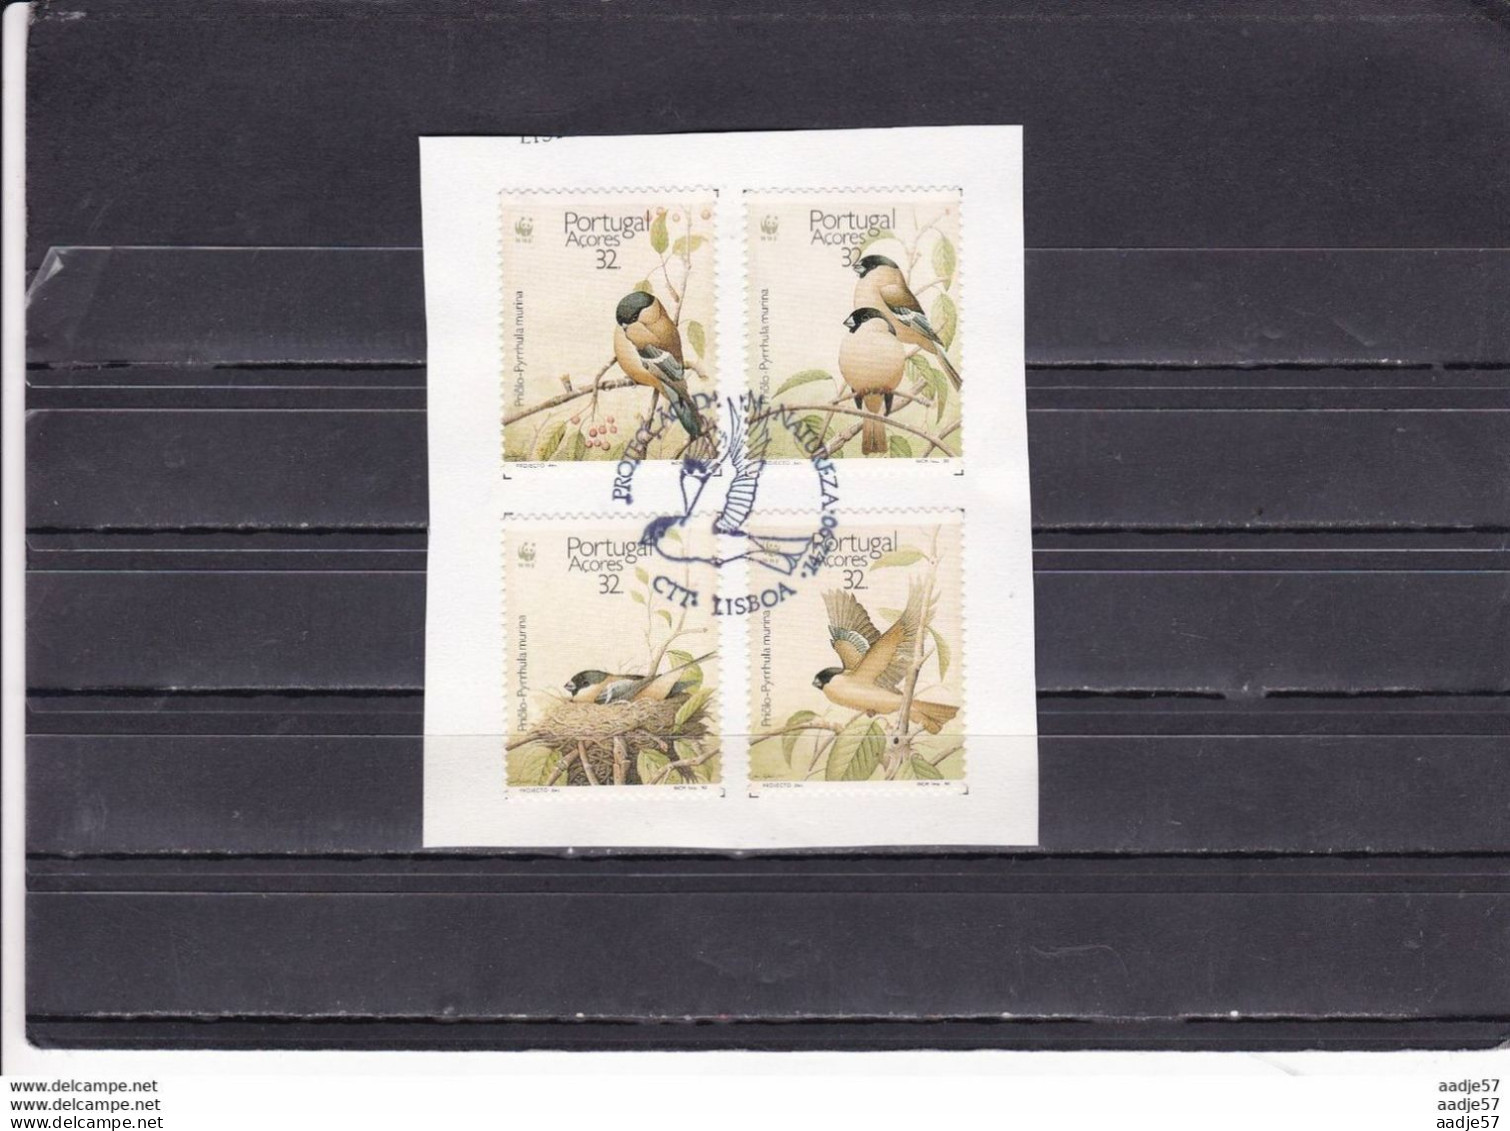 PORTUGAL ACORES 1990 Mi 405-408 , USED FDC Stamp - Mussen